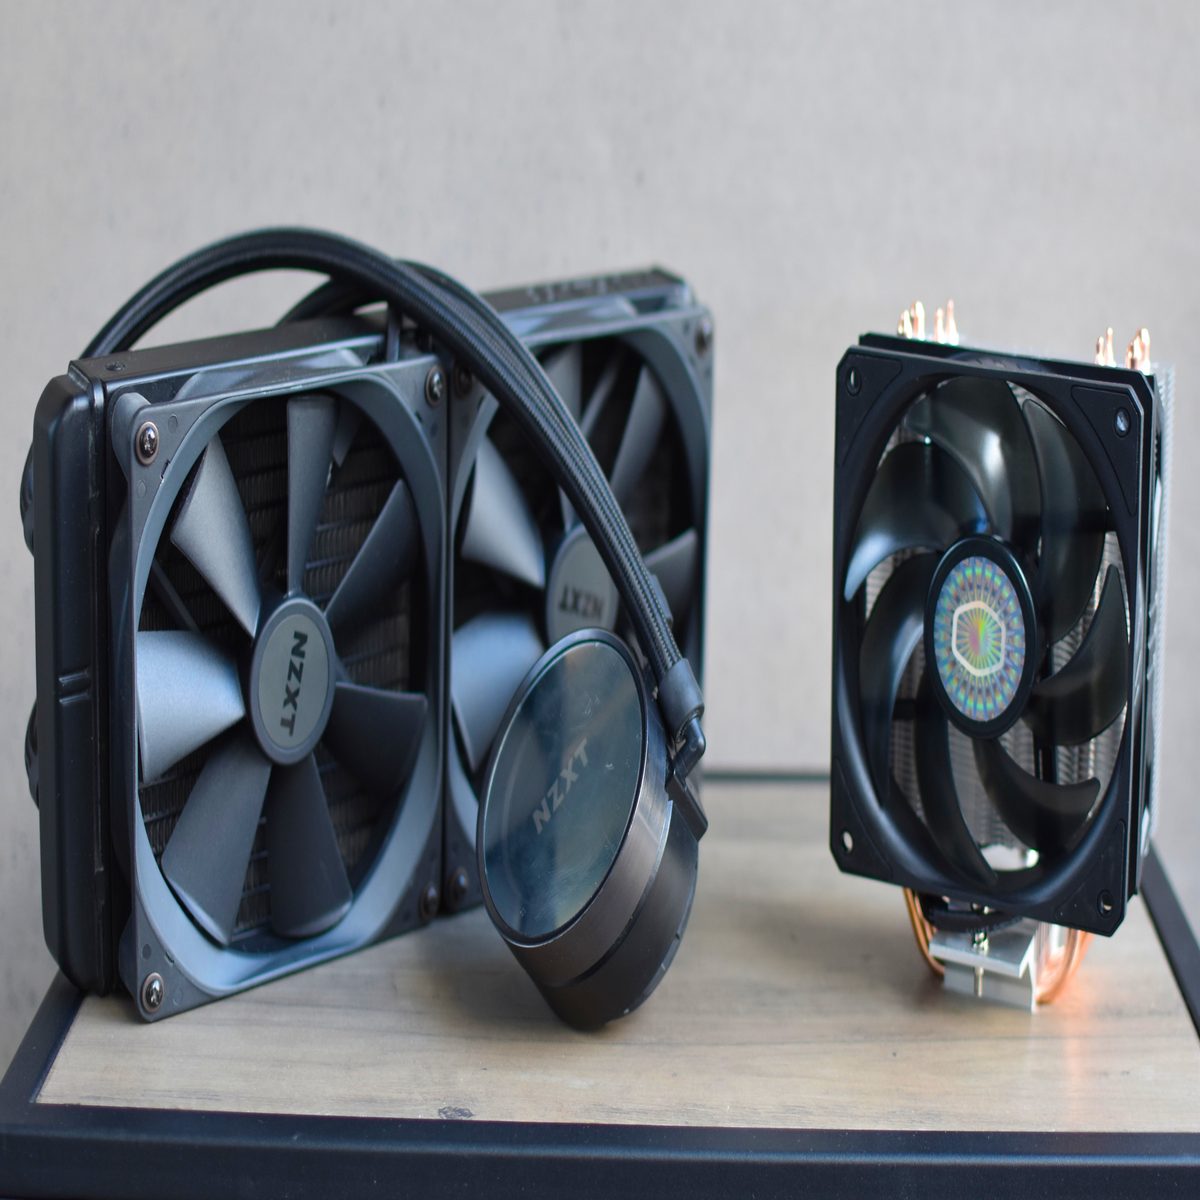 10 Reasons to Use Liquid Cooling vs Air Cooling in Gaming PC